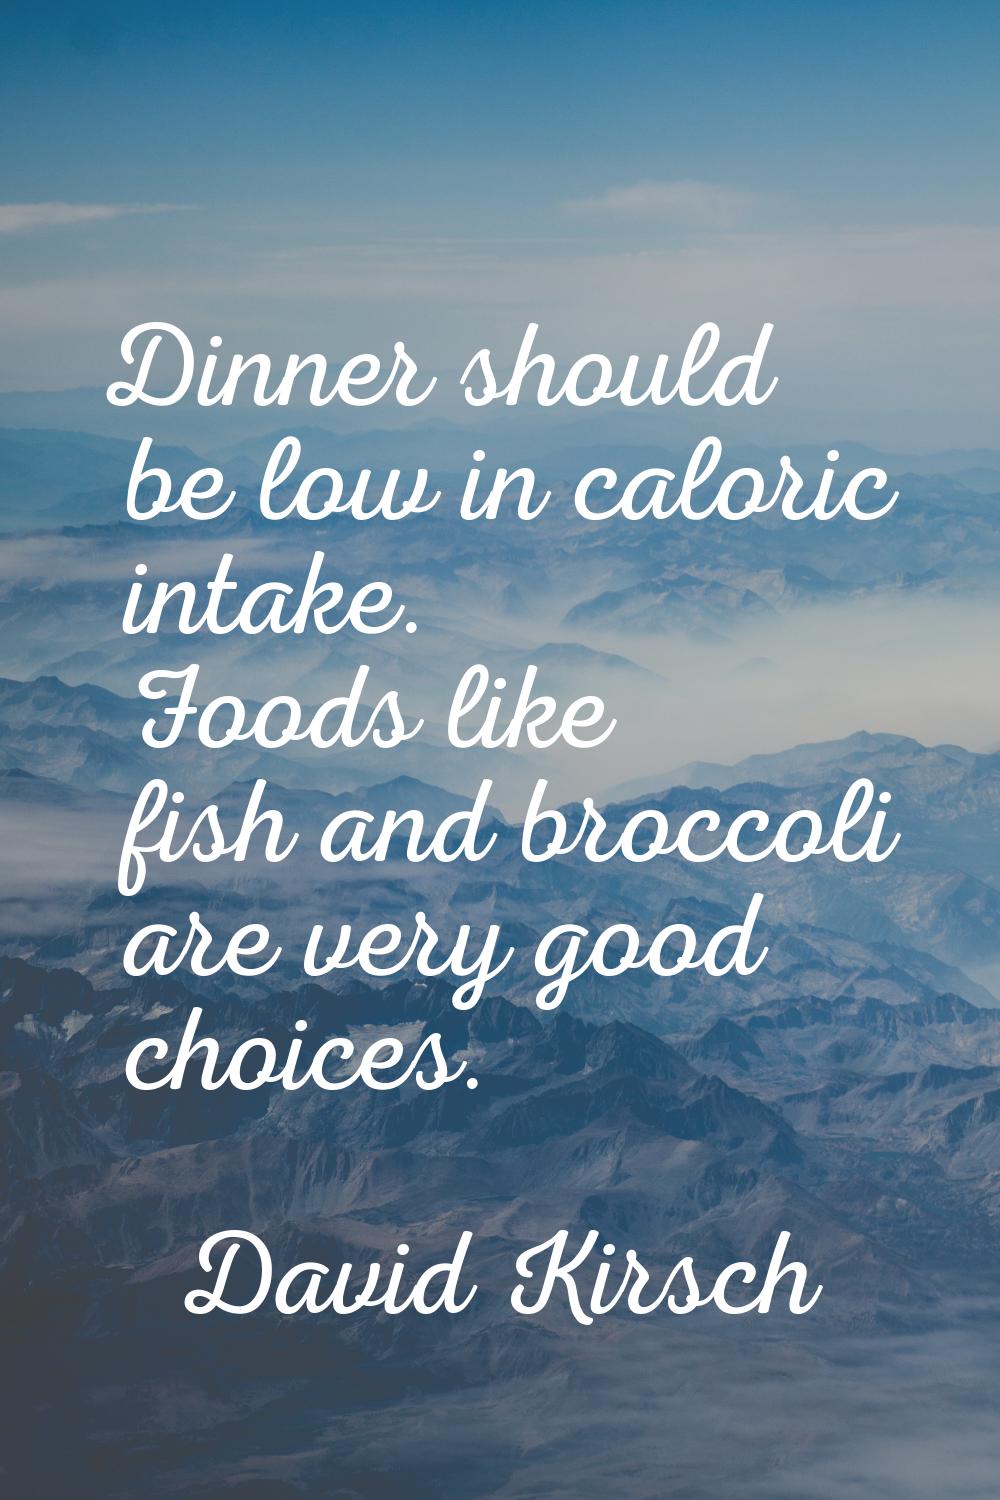 Dinner should be low in caloric intake. Foods like fish and broccoli are very good choices.